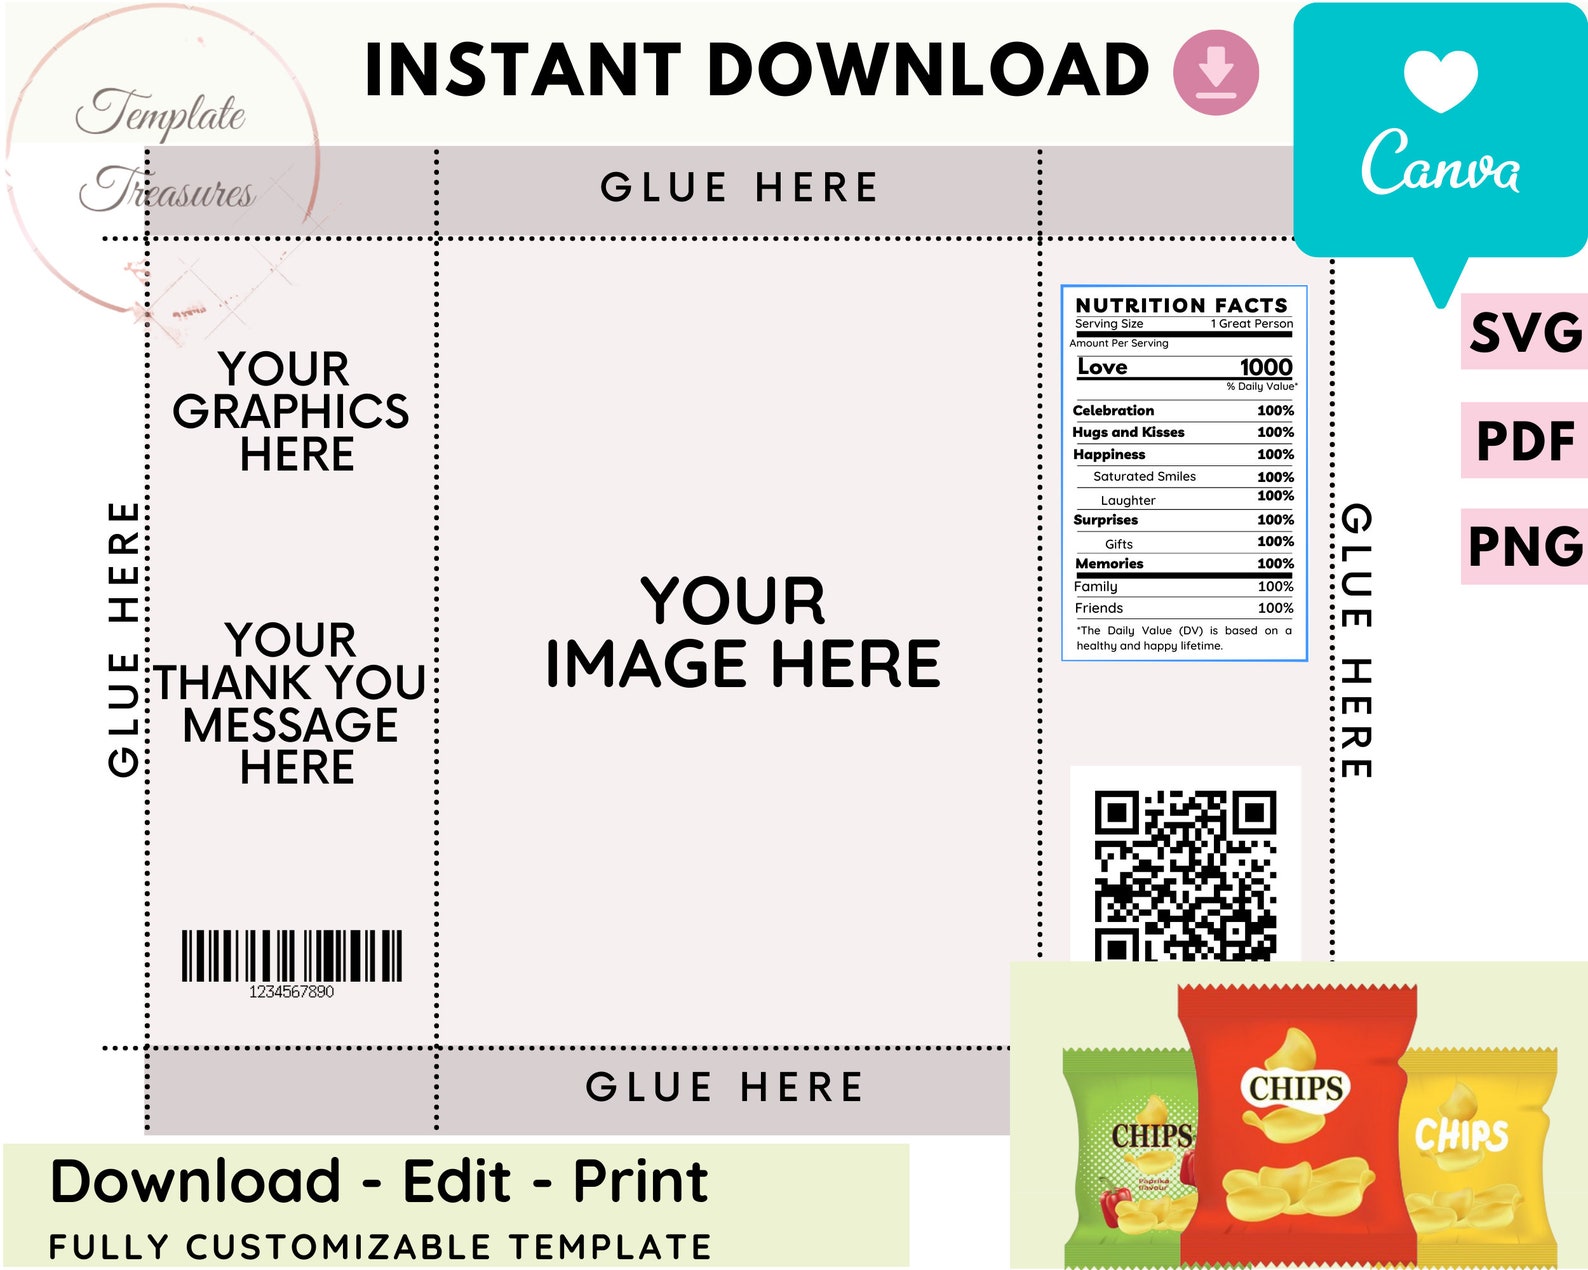 Chip Bag Template Instant Download Chip Bag Template Chip | Etsy